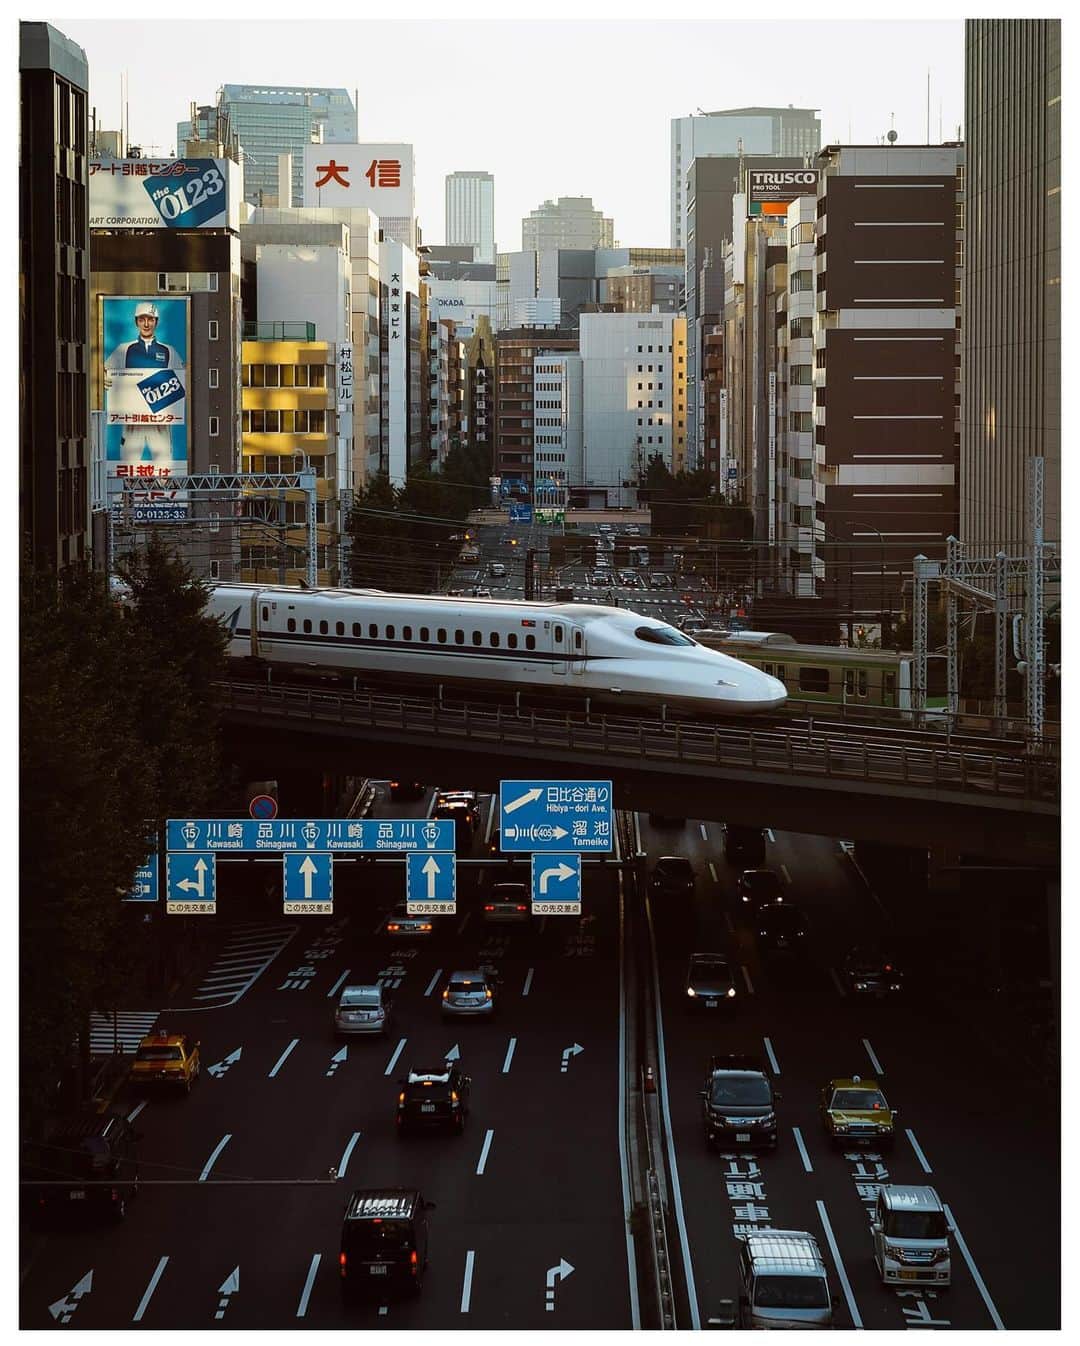 Takashi Yasuiのインスタグラム：「Tokyo 🚄 October 2016  📕My photo book - worldwide shipping daily - 🖥 Lightroom presets ▶▶Link in bio  #USETSU #USETSUpresets #TakashiYasui #SPiCollective #filmic_streets #ASPfeatures #photocinematica #STREETGRAMMERS #street_storytelling #bcncollective #ifyouleave #sublimestreet #streetfinder #timeless_streets #MadeWithLightroom #worldviewmag #hellofrom #reco_ig」